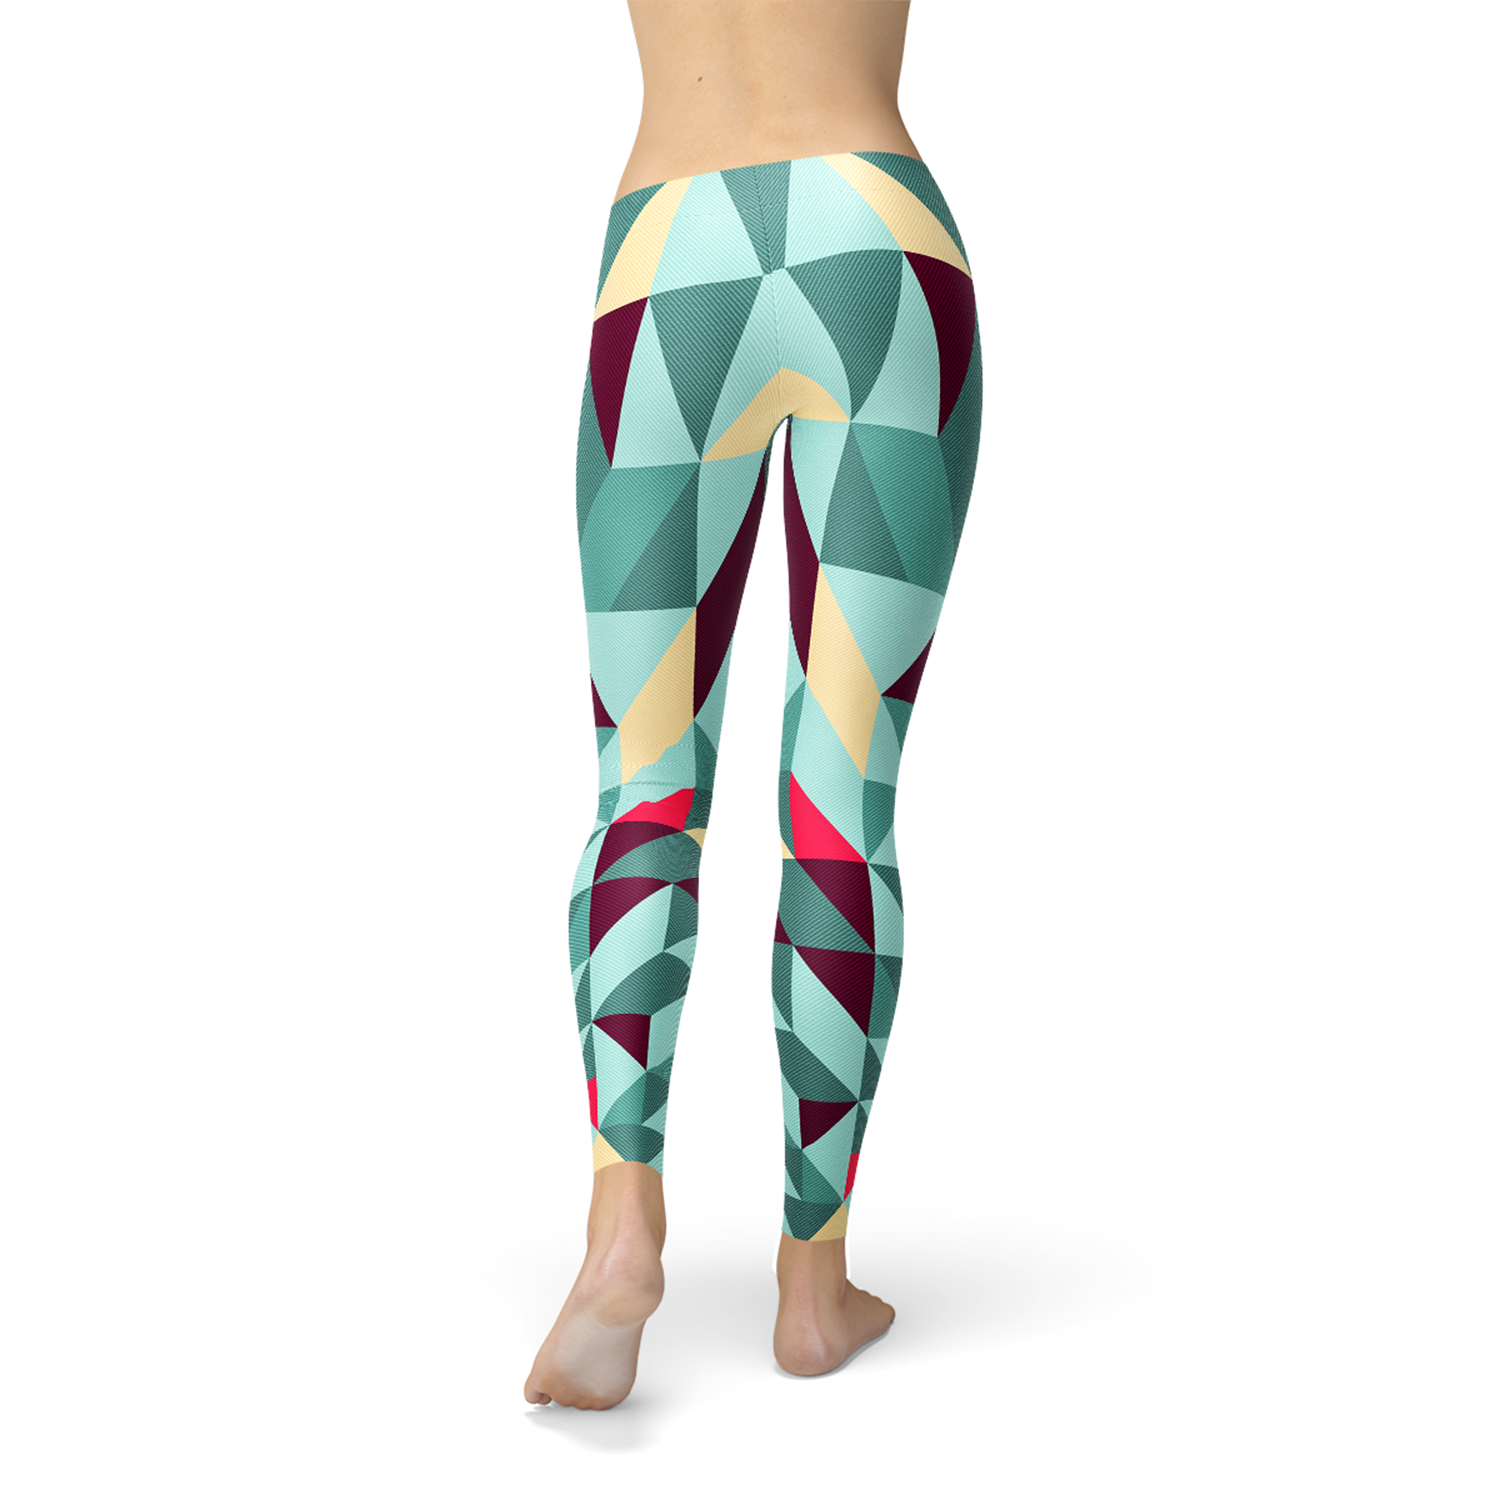 Womens Leggings w/ Colorful Me – Triangles Clothing Geometric Found Accessories Everyday By - 